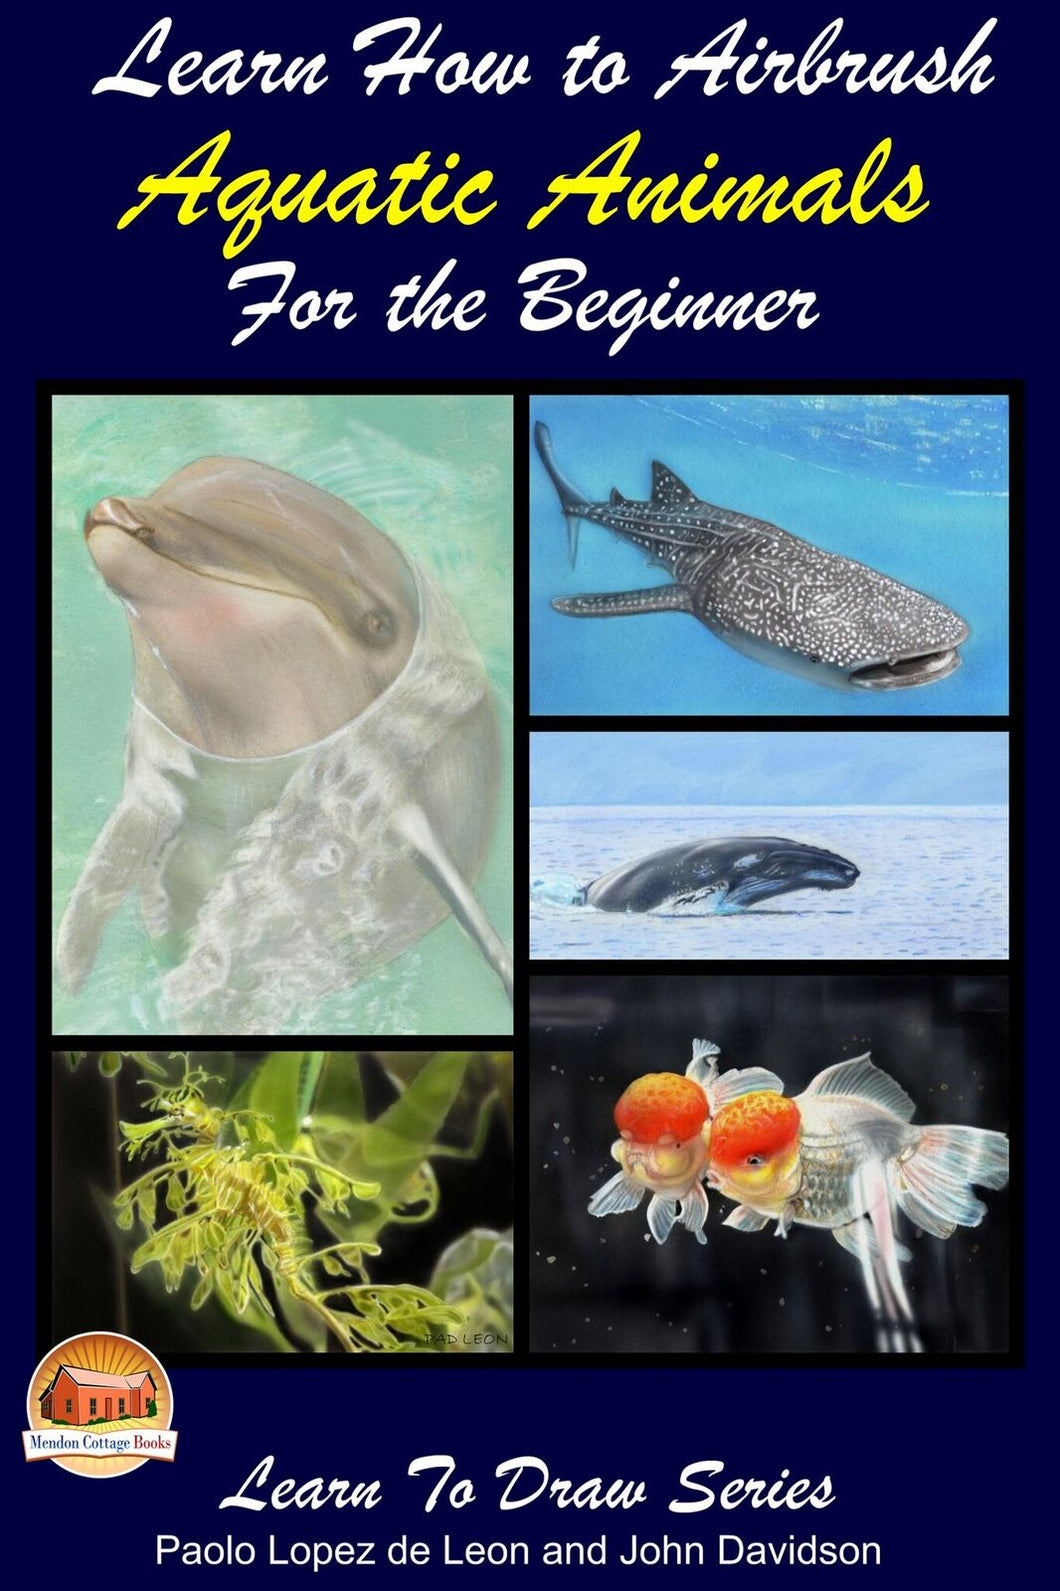 Learn How to Airbrush Aquatic Animals for the Beginner